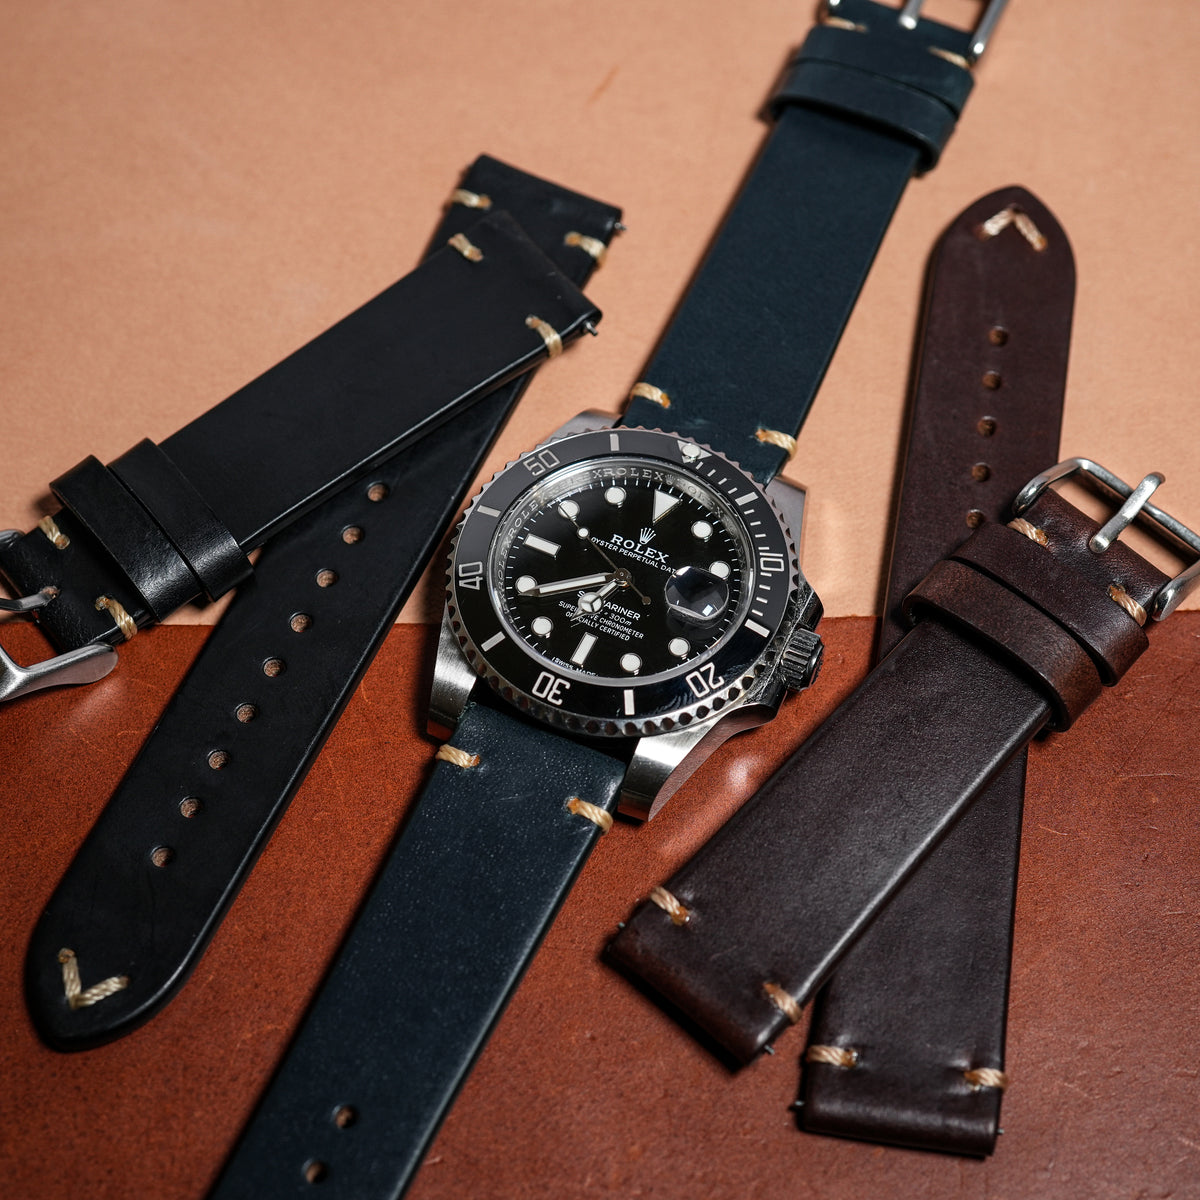 Premium Rally Suede Leather Watch Strap in Black - Nomad Watch Works SG